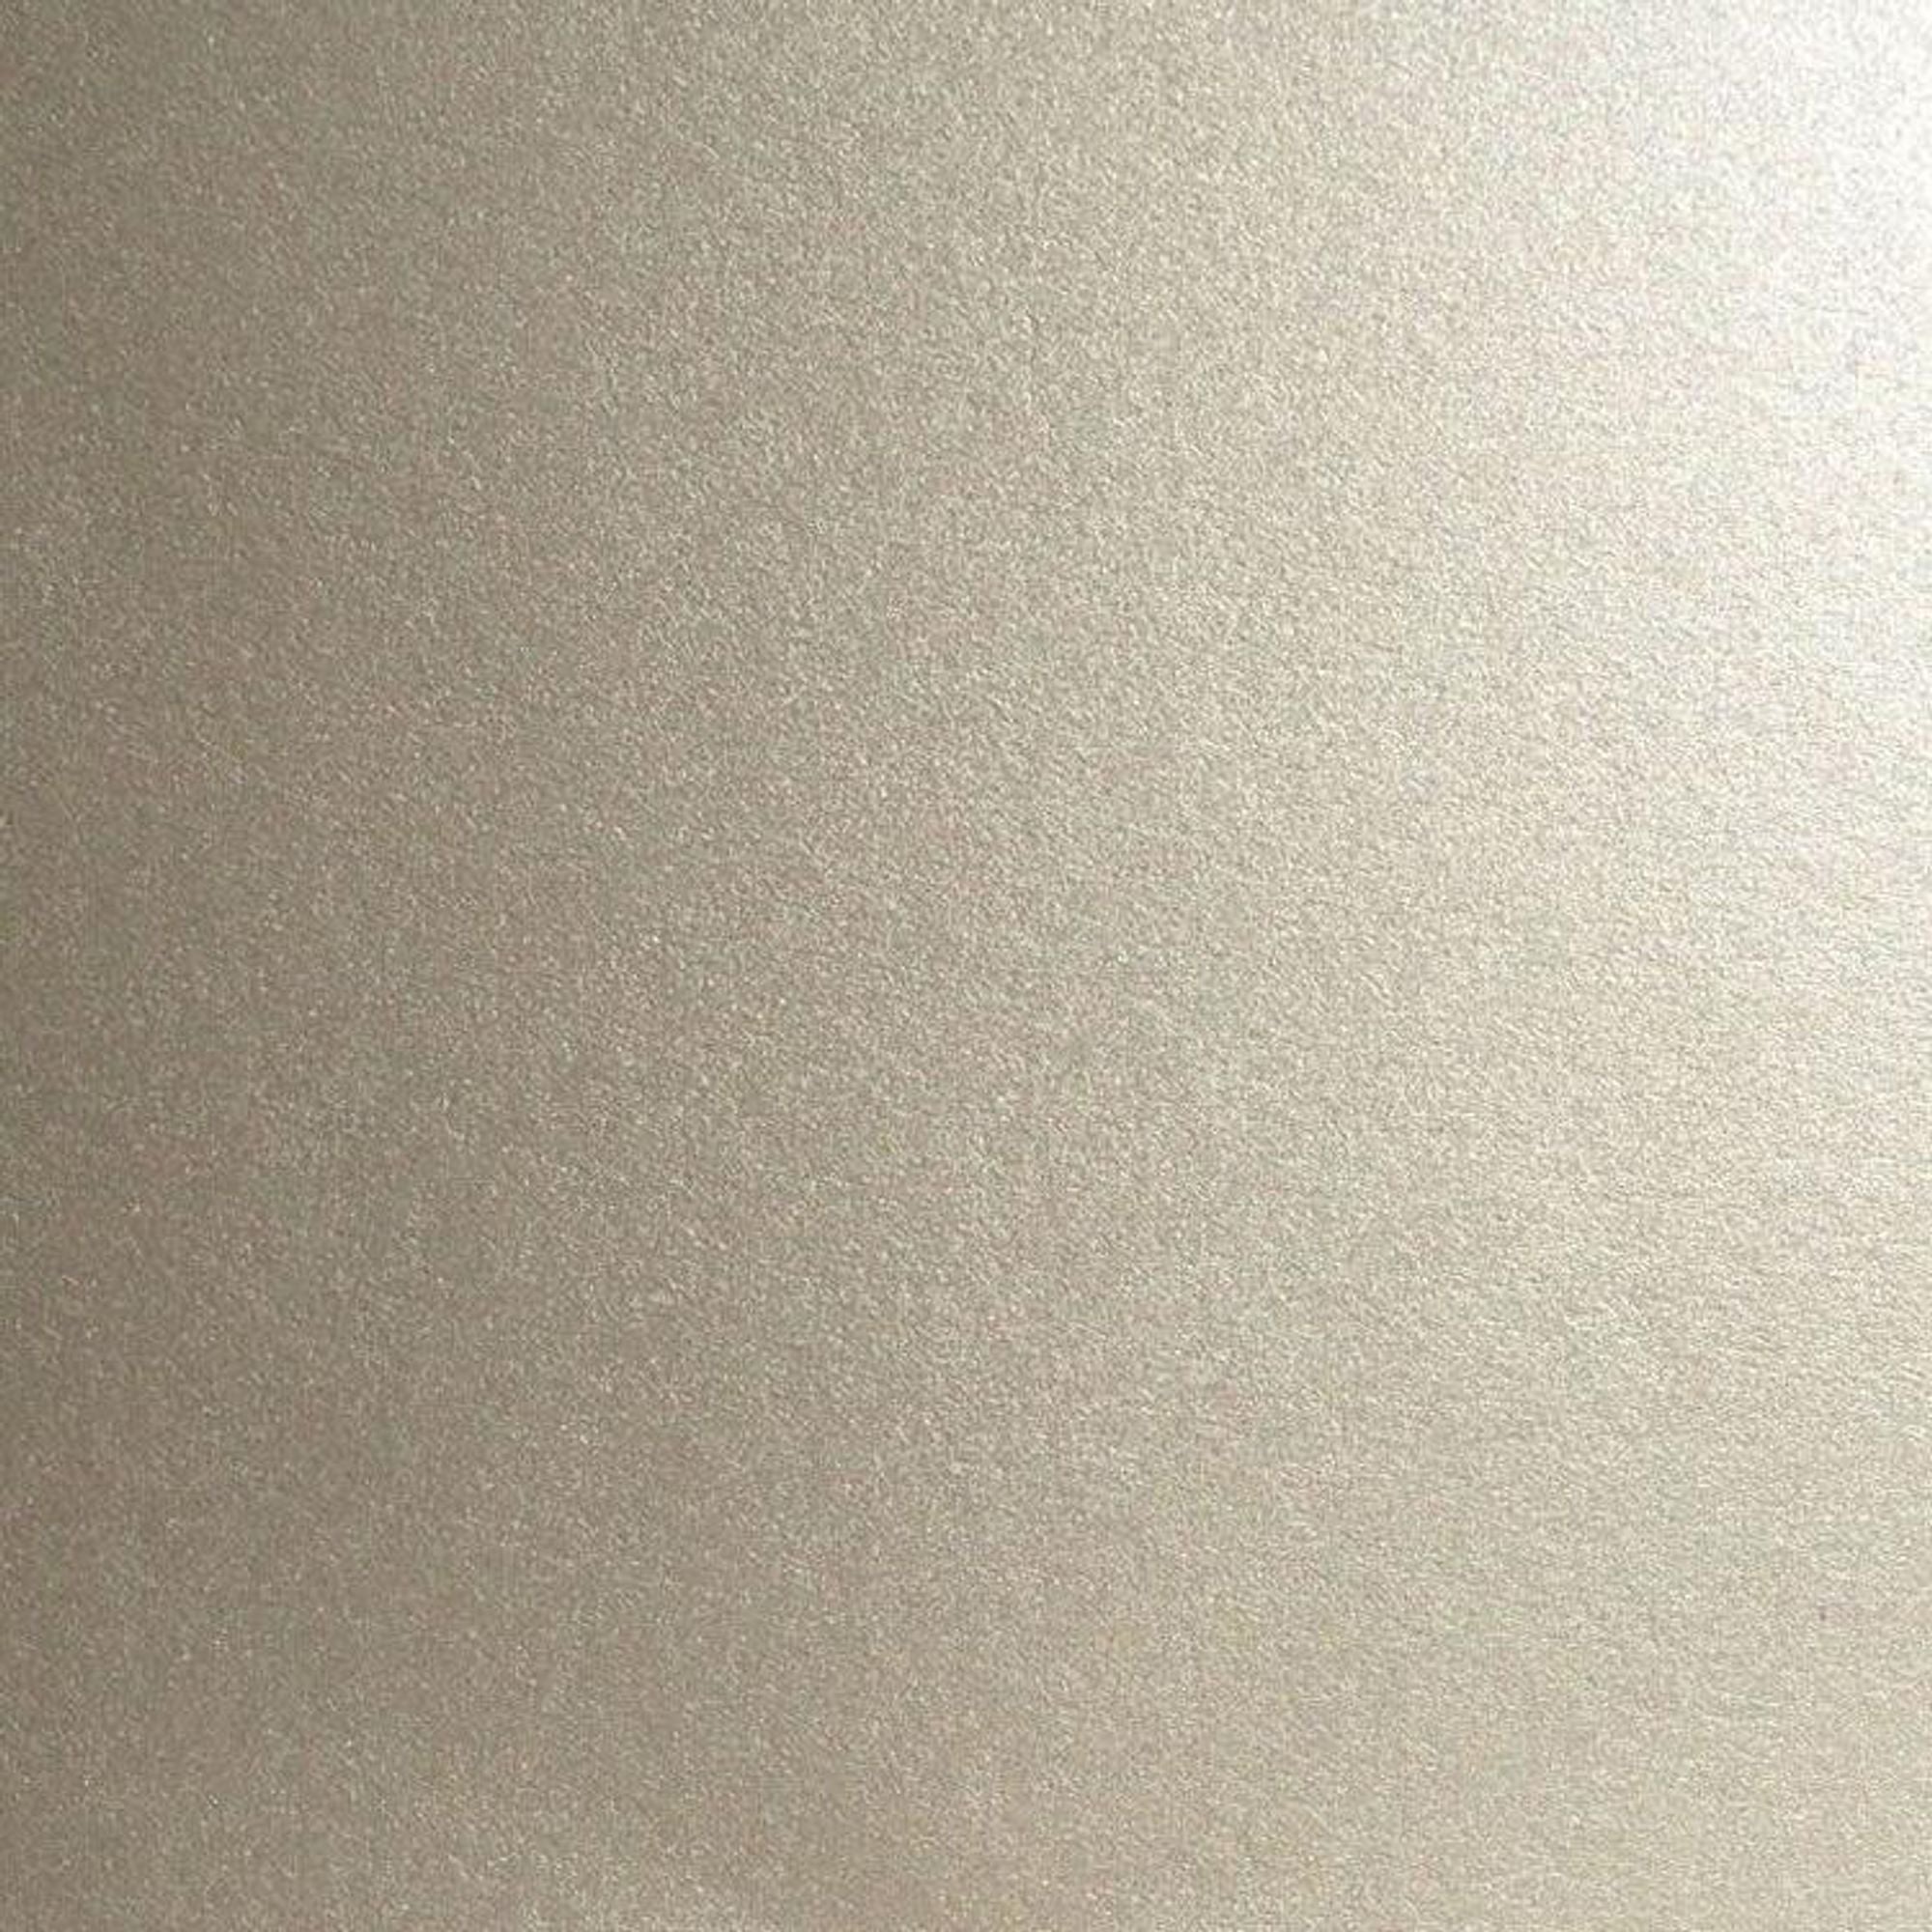 Foundation A4 Pearl Cardstock 230gsm pk 20 - Silver Shine